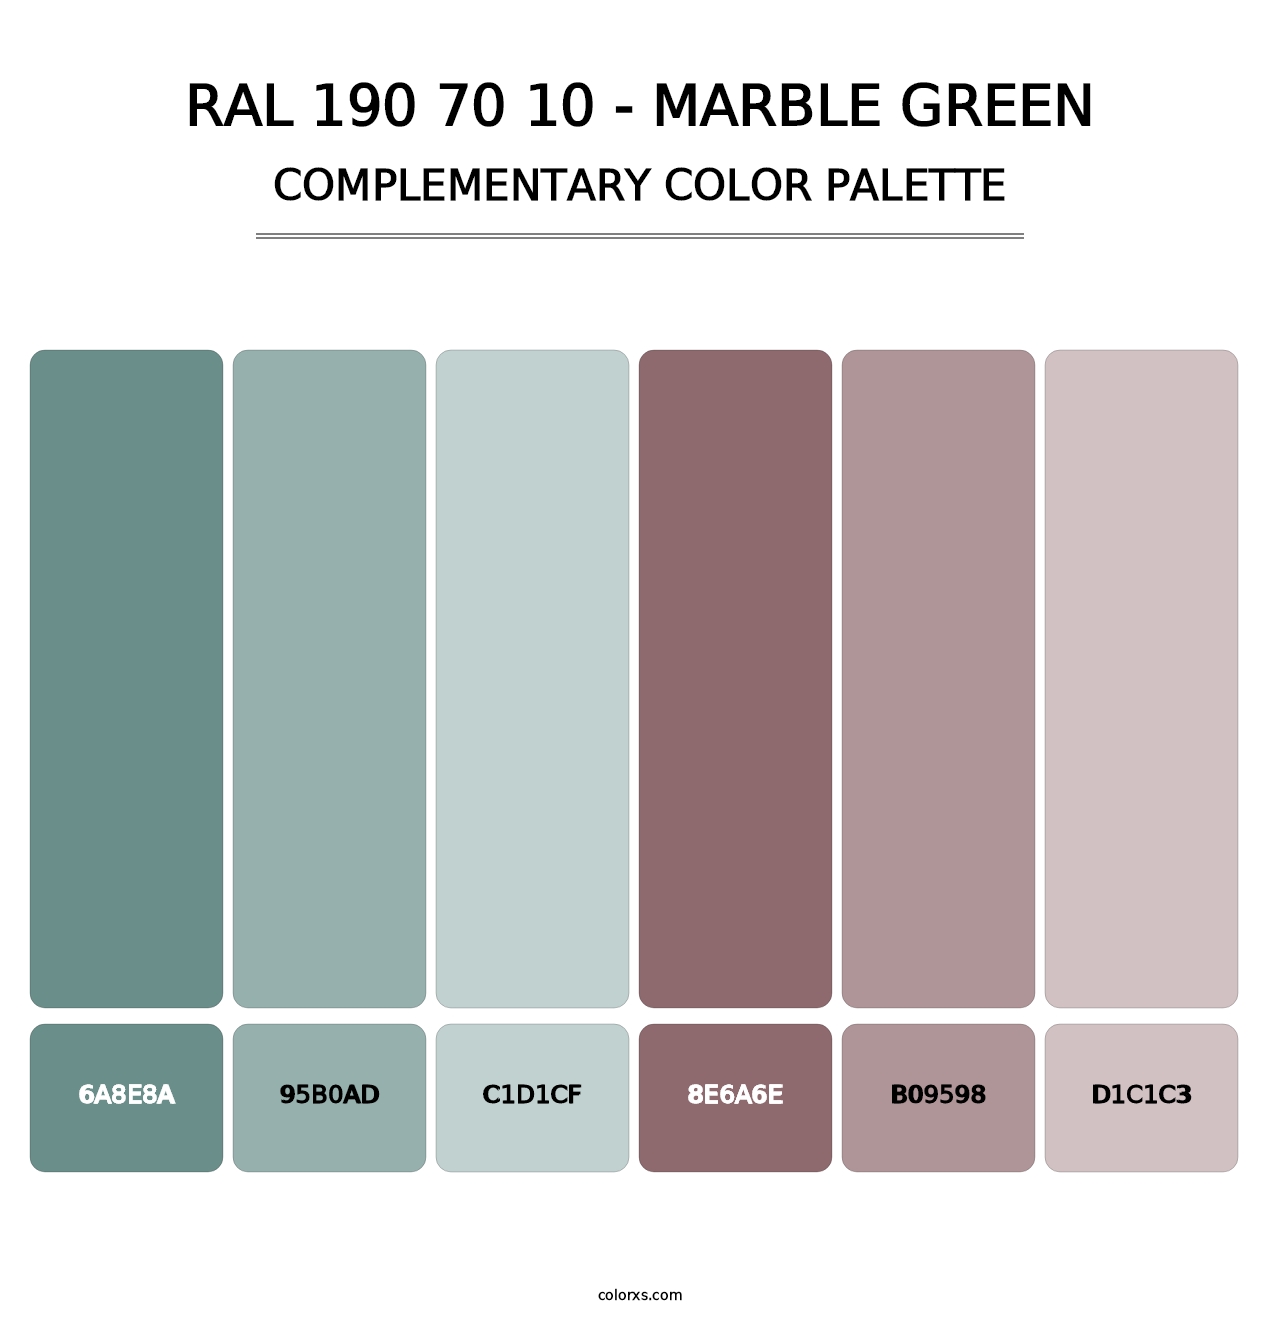 RAL 190 70 10 - Marble Green - Complementary Color Palette